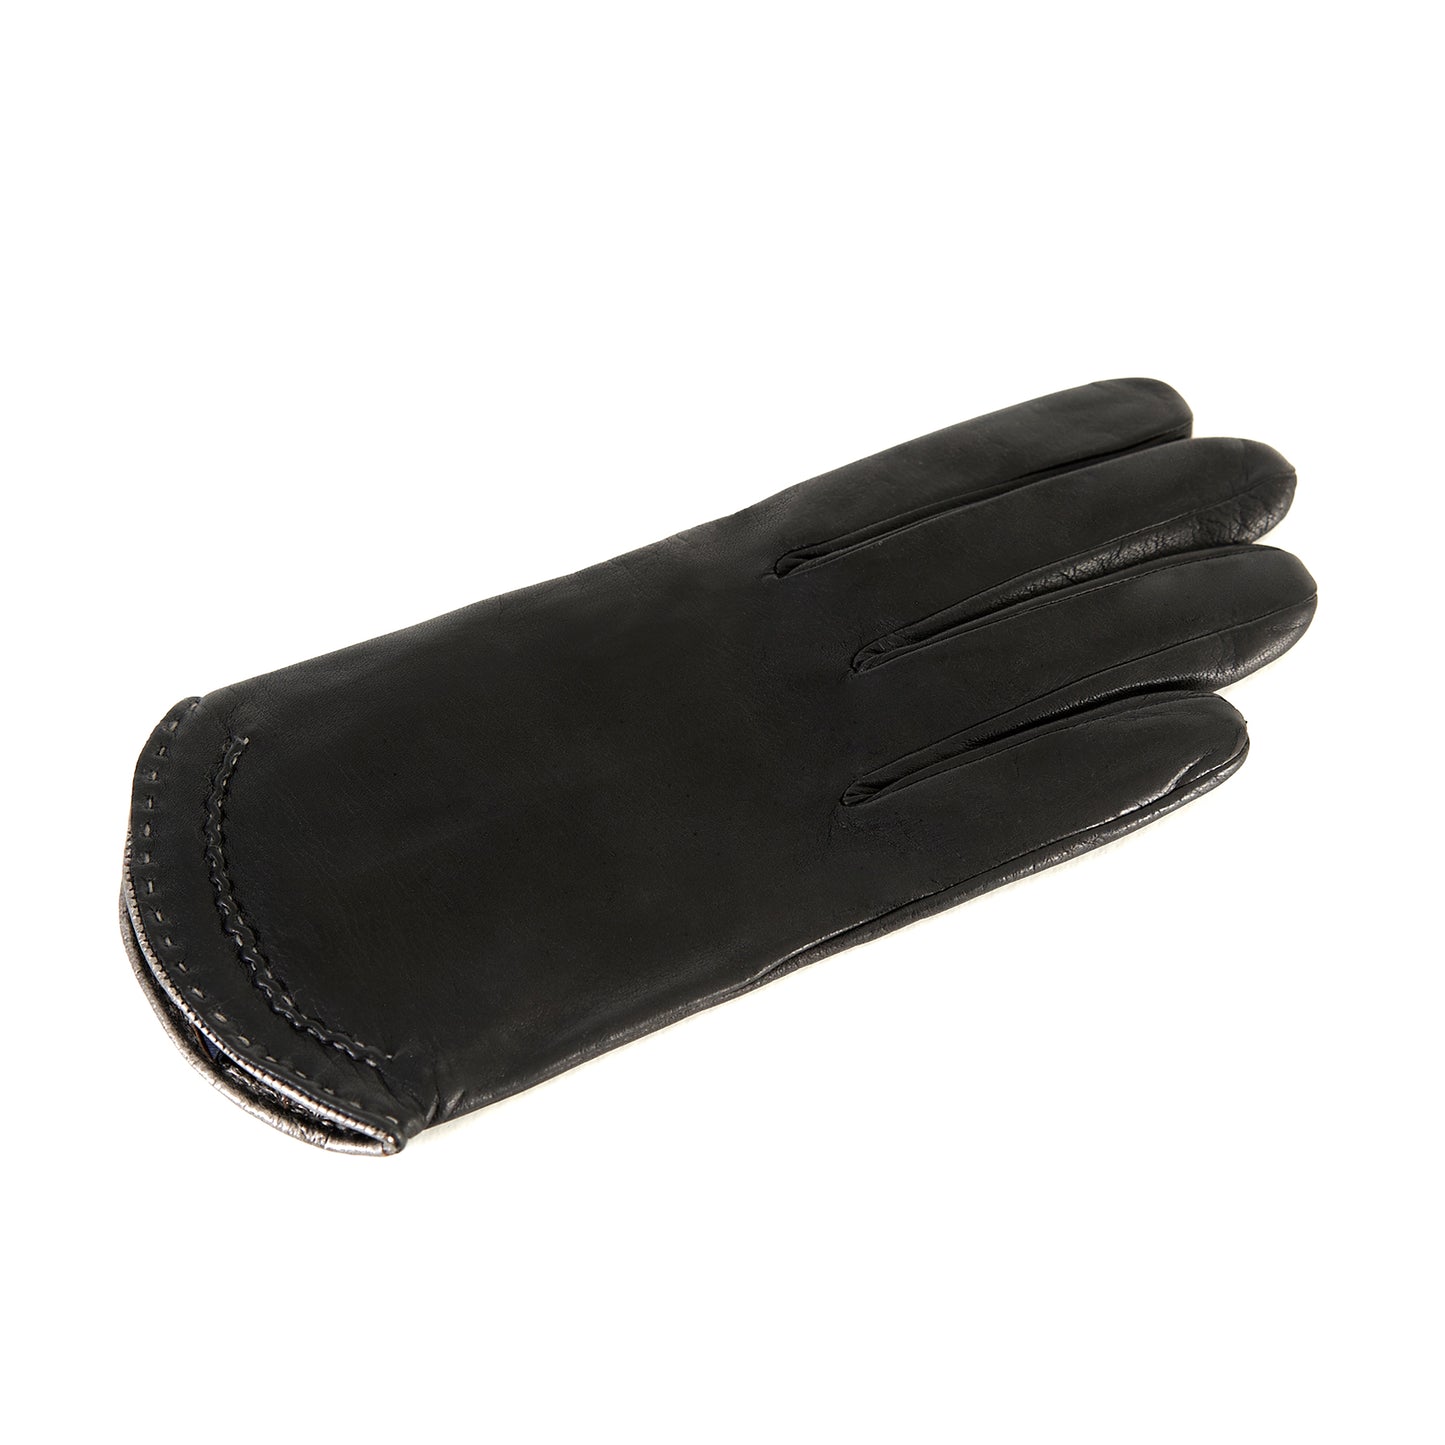 Women's black nappa leather gloves with metallic leather edge silk lined